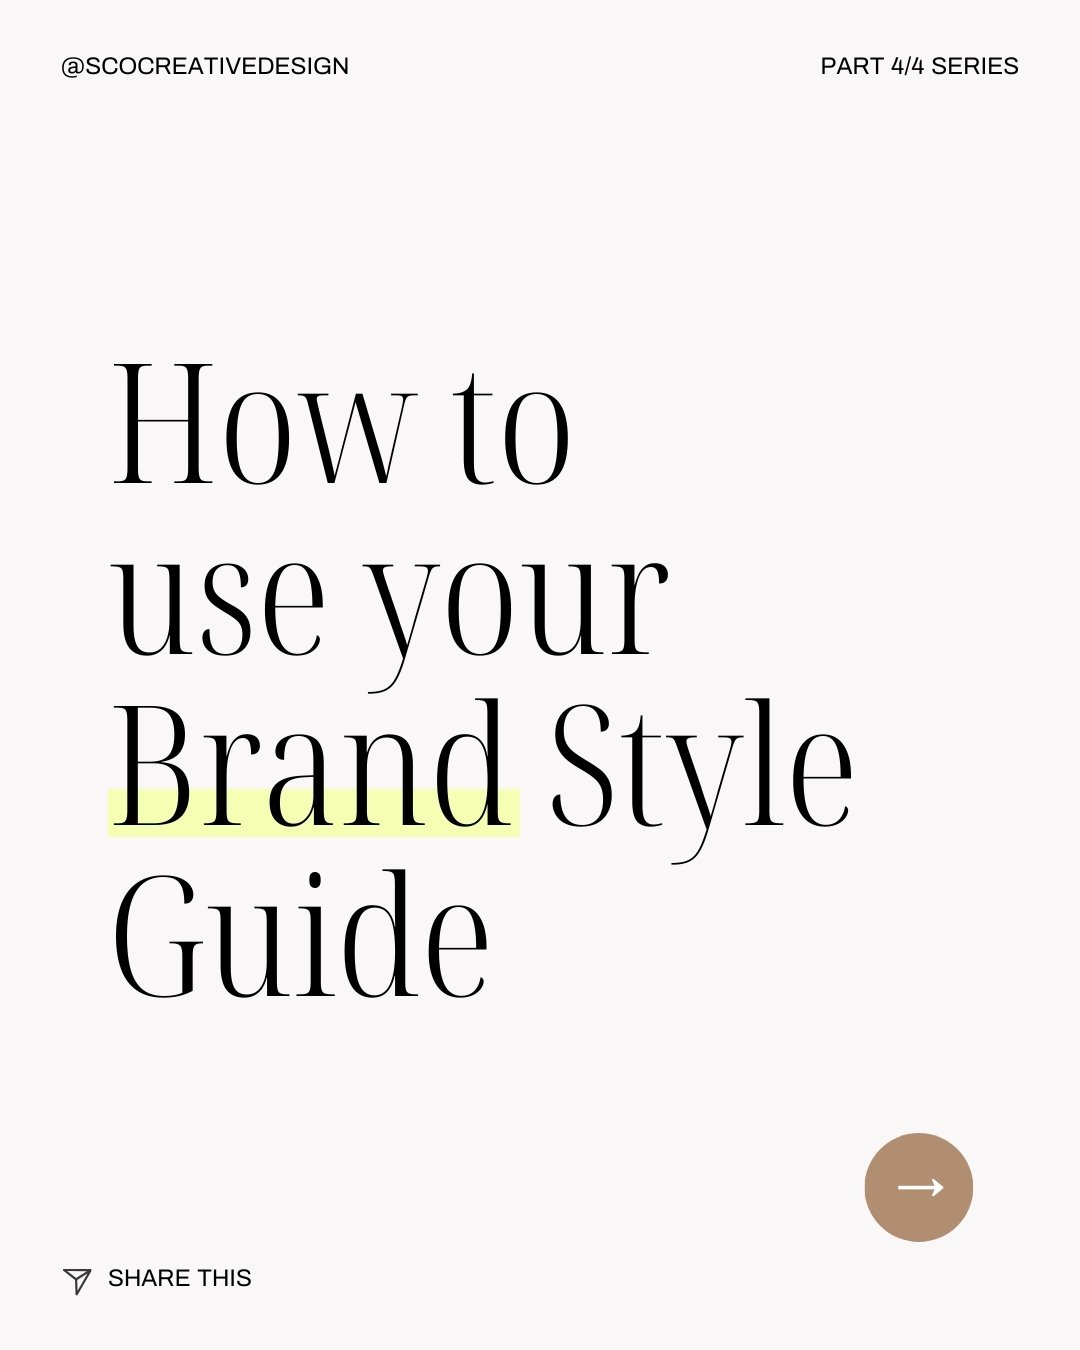 The brand style guide is such an integral part of the brand design process. It acts as a visual rulebook for maintaining a cohesive and impactful brand identity.

By following the guidelines listed in your brand style guide, from logo usage to color 